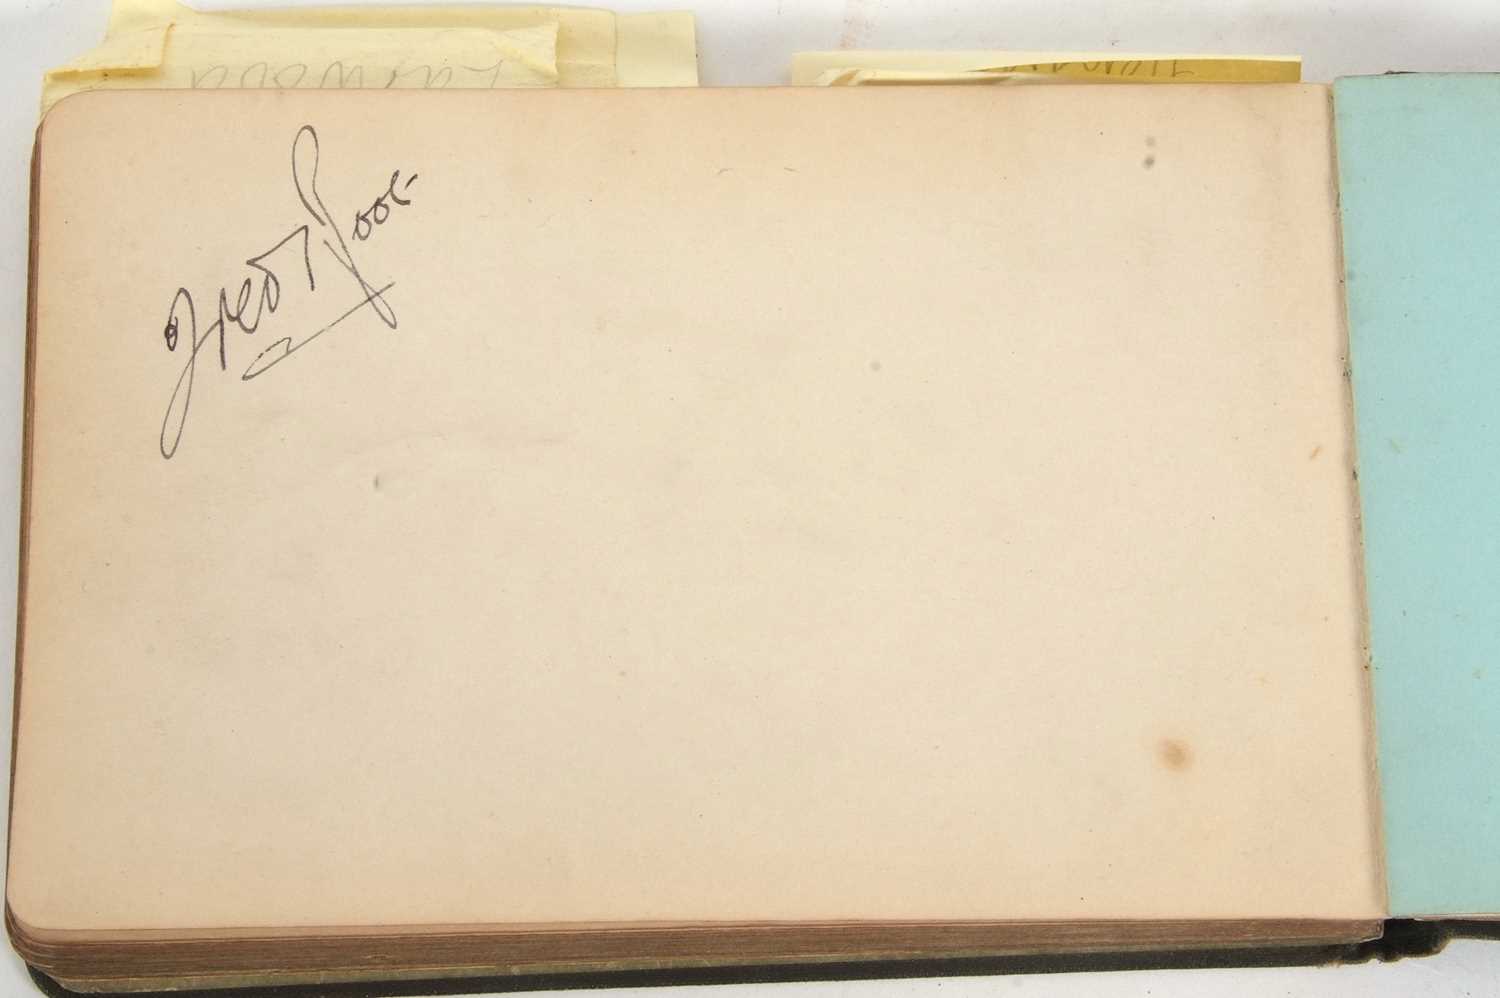 Autograph album containing various signatures of England cricketers including Fred Root, England and - Image 14 of 21